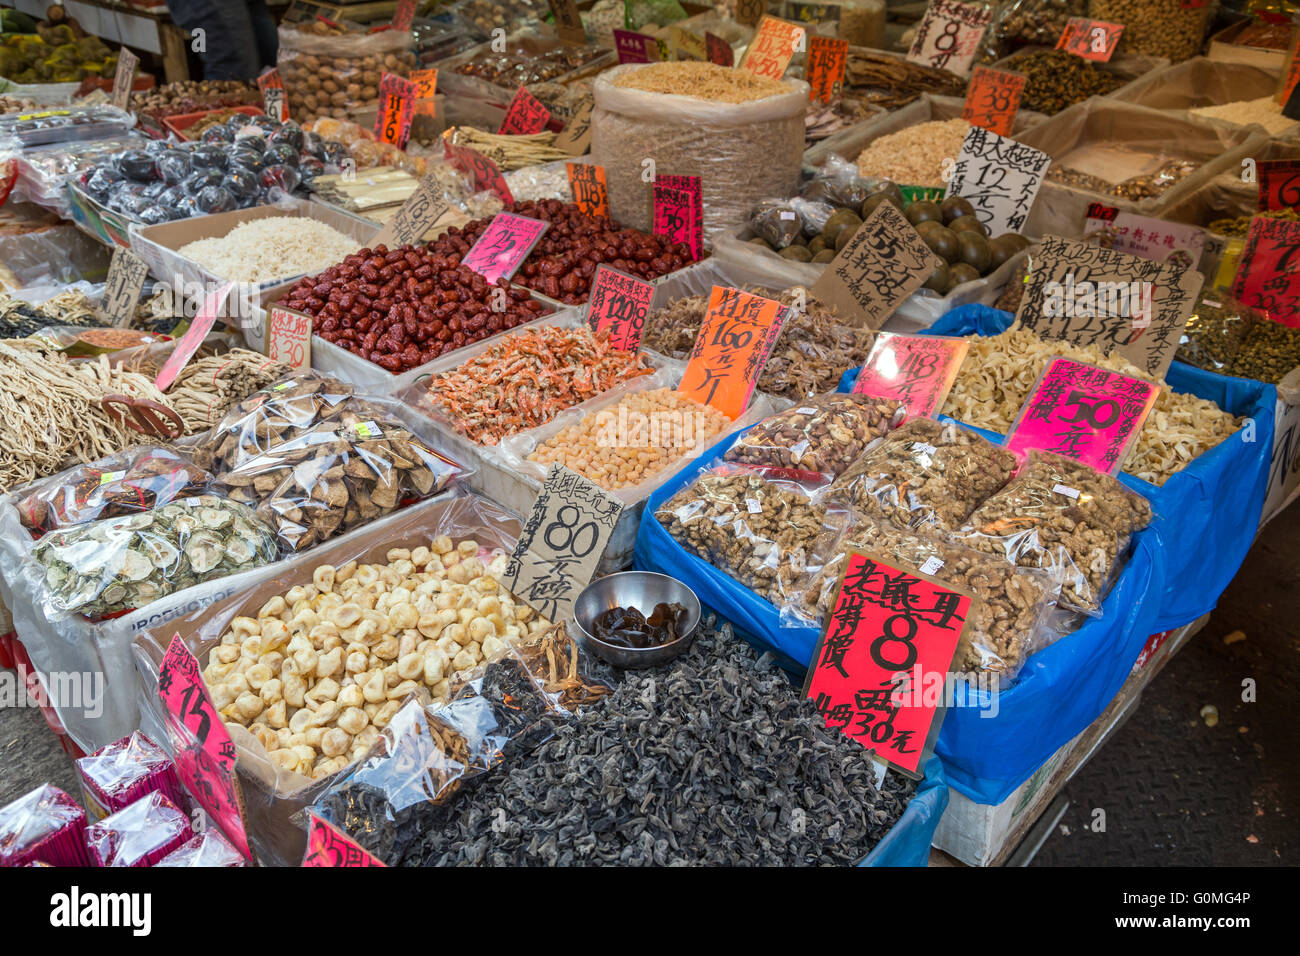 Miscellaneous (dried) food ingredients for sale at the street market in Tai Po, Hong Kong, China. Stock Photo